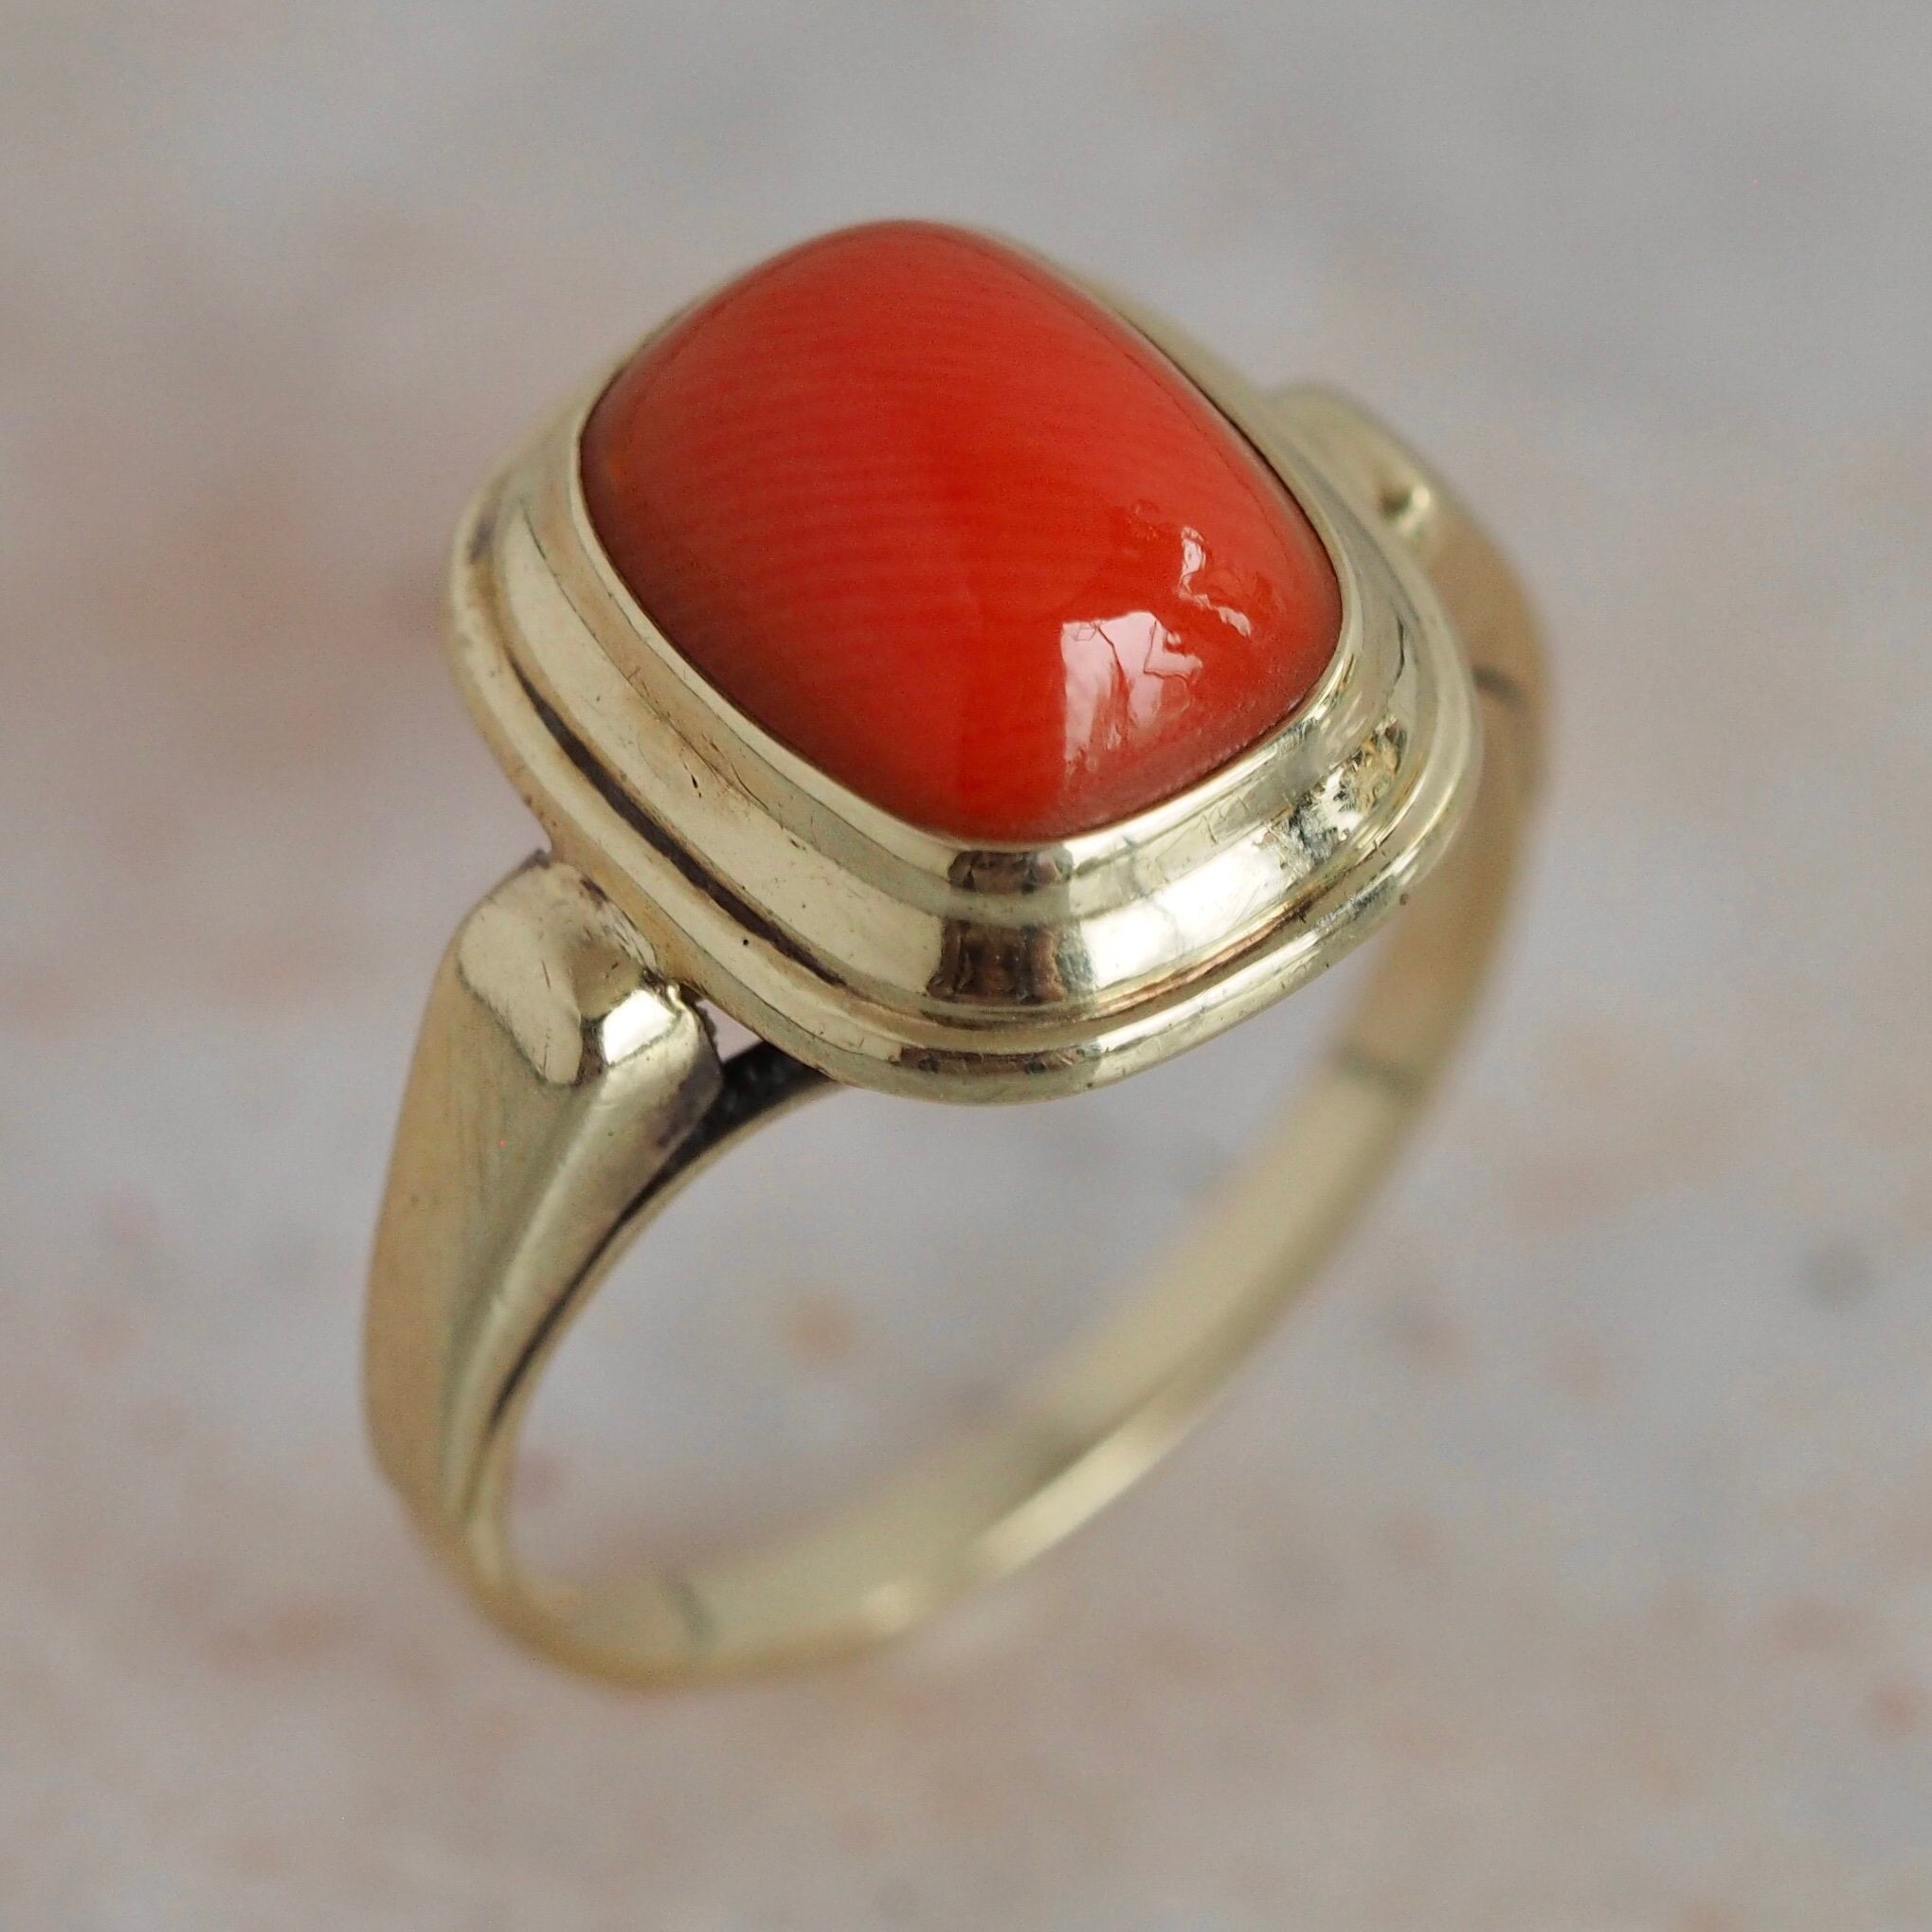 Amazon.com: 8 Carat Natural Australian Red Coral Mens Heavy Designed Ring  Sterling Silver 925 Handmade Marjan Ring Gift for Him Religious Ring (11.5)  : Handmade Products